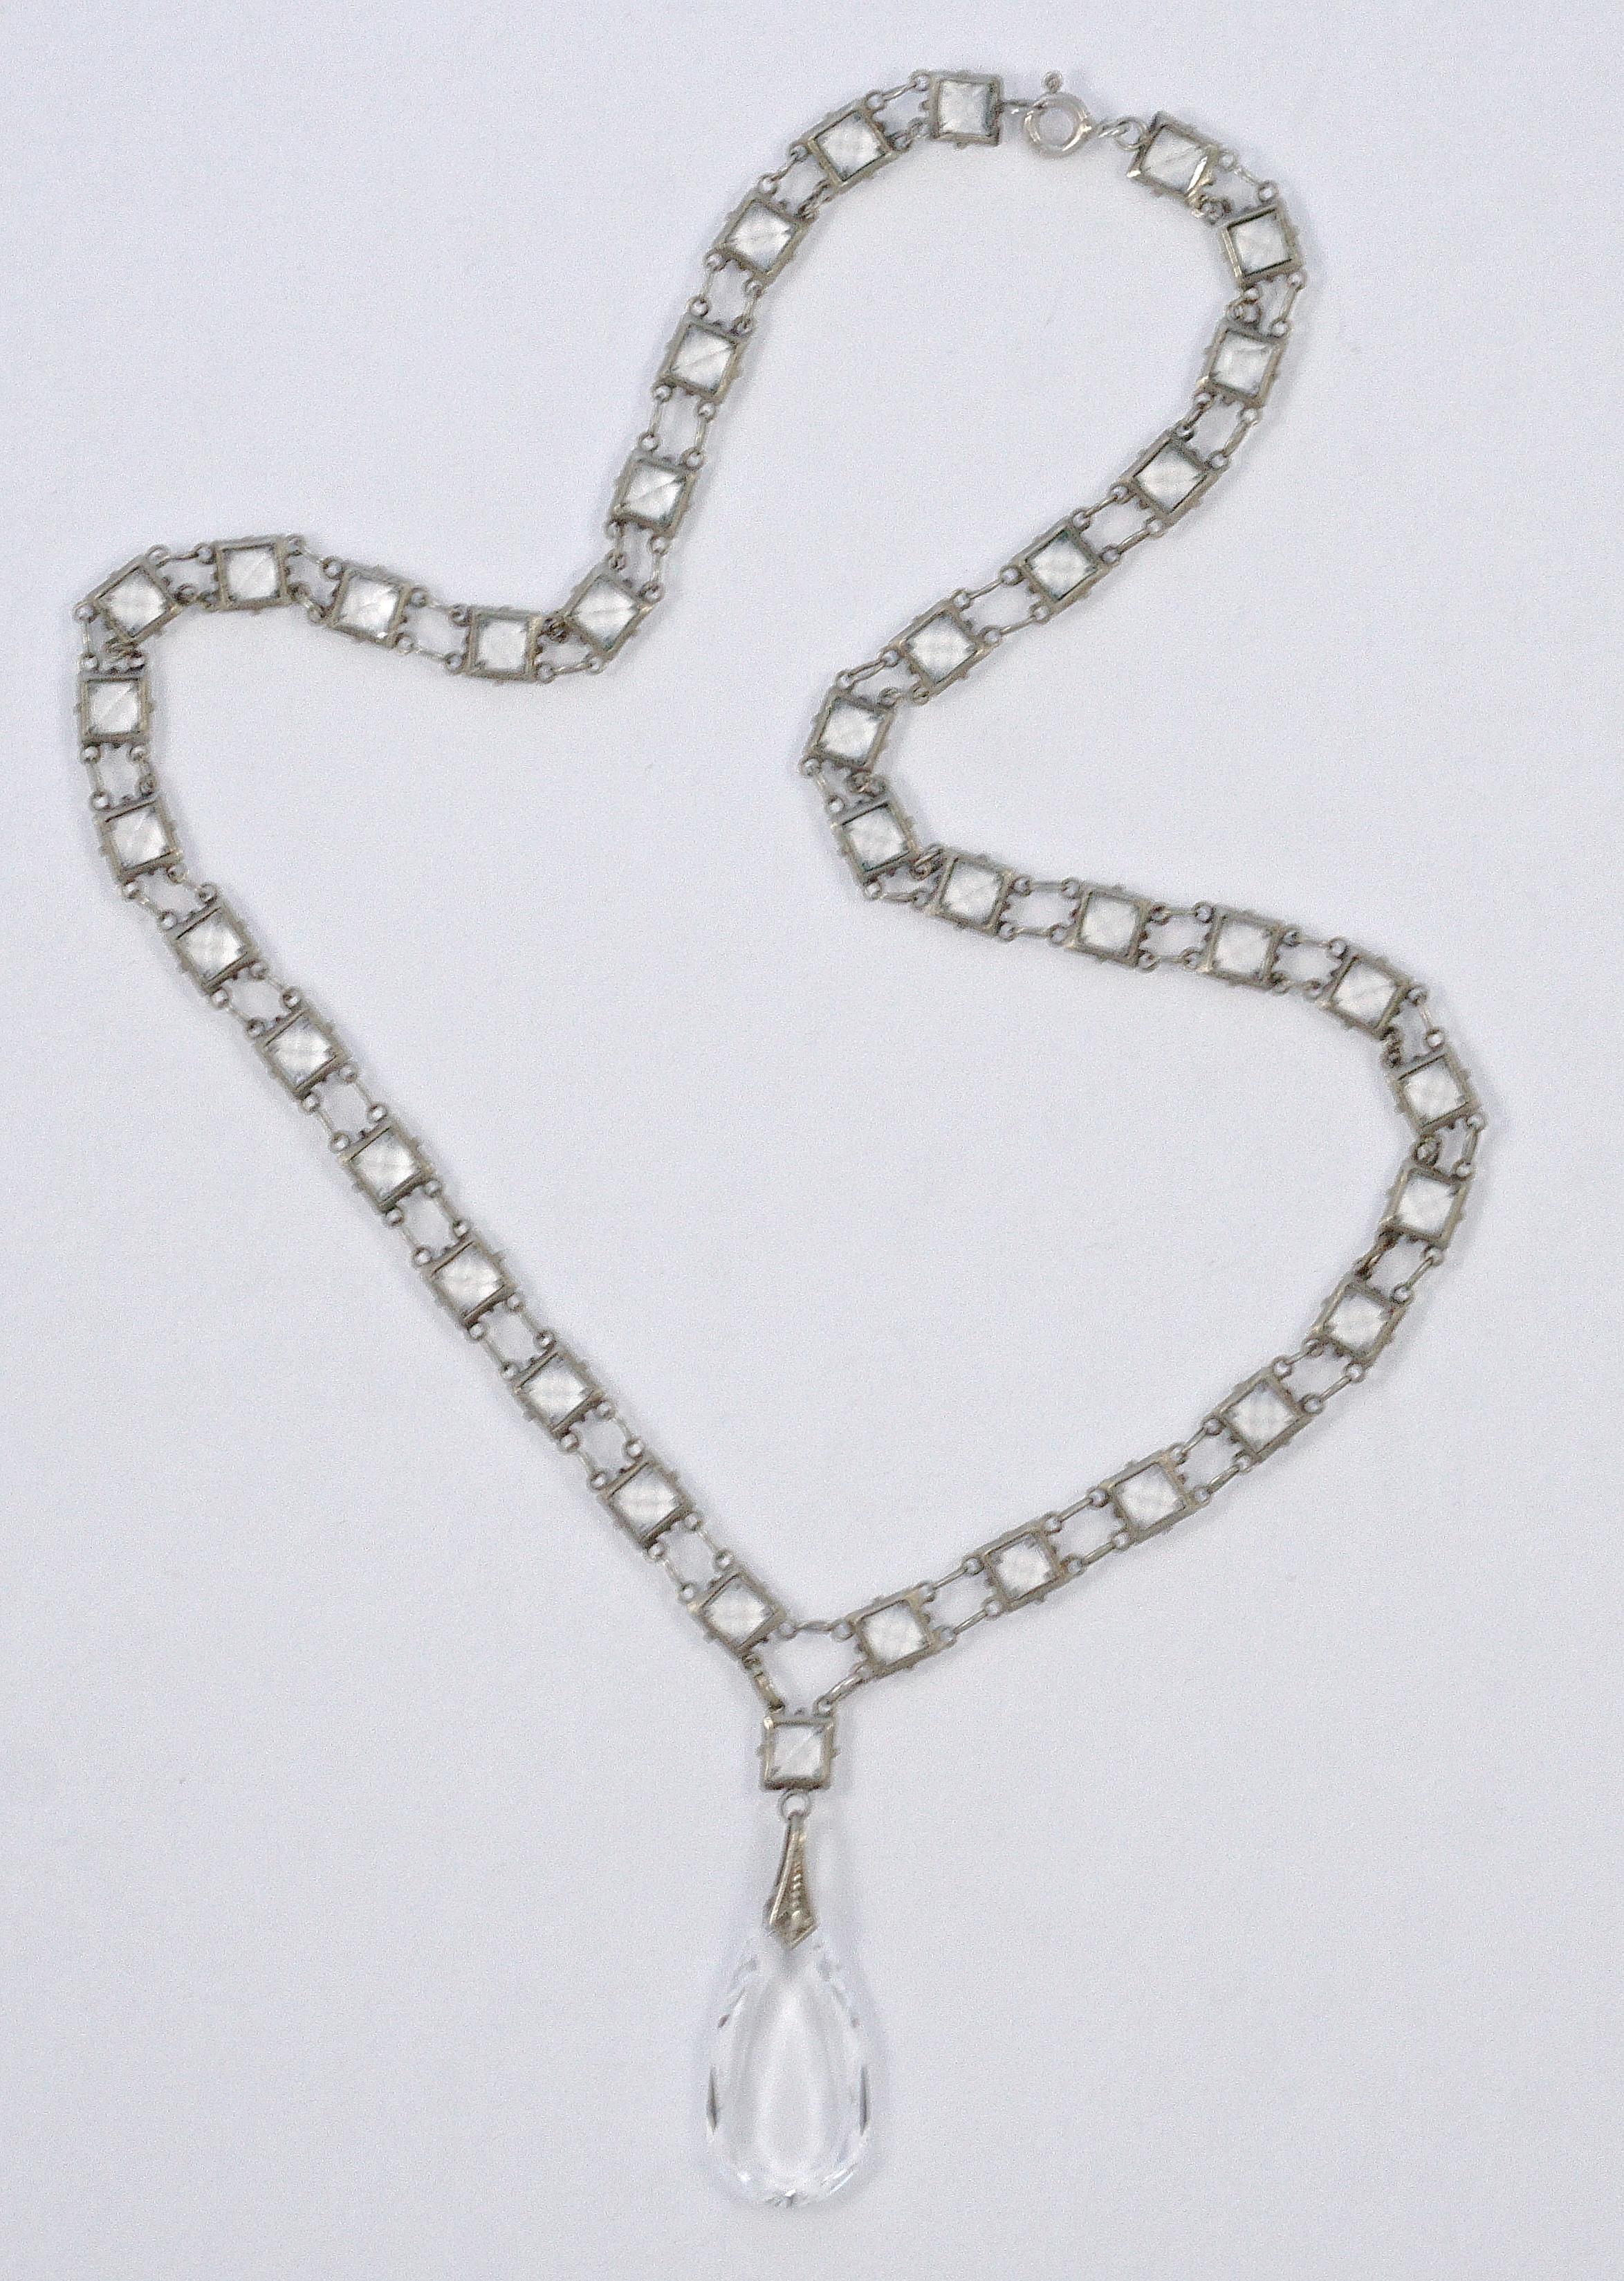 Art Deco  Silver Tone Link Chain Necklace Square Glass Crystals Teardrop Pendant For Sale 3